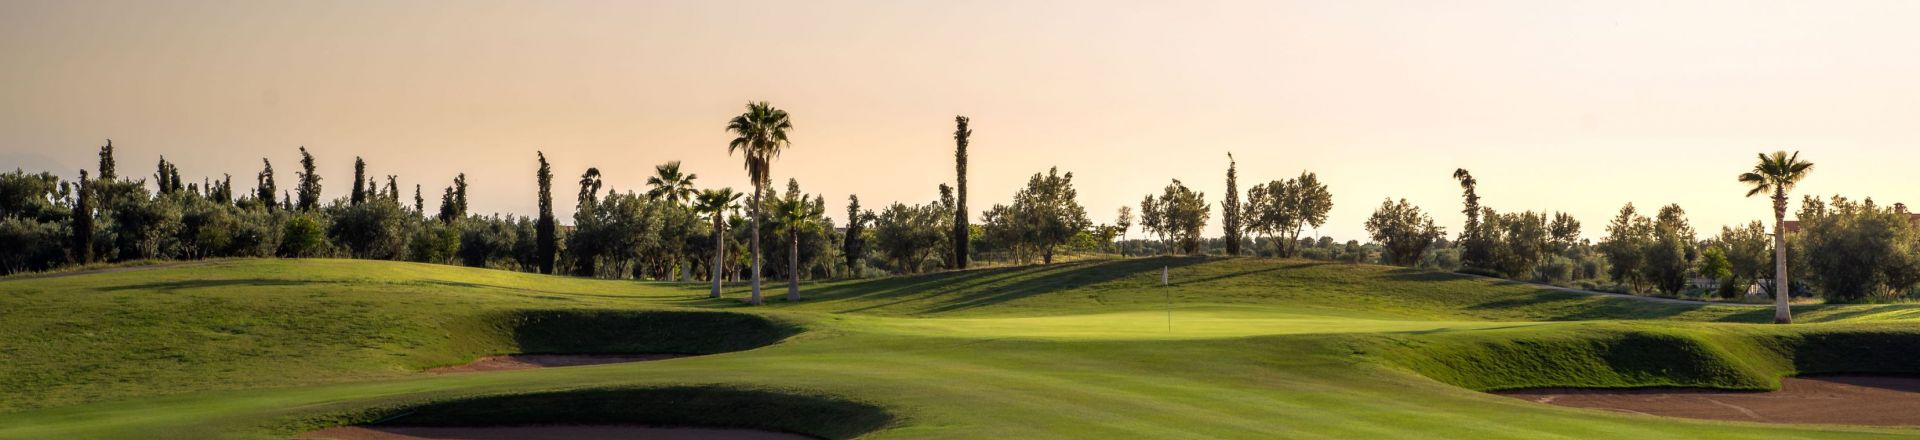 Golf in Morocco at PalmGolf Marrakech Ourika